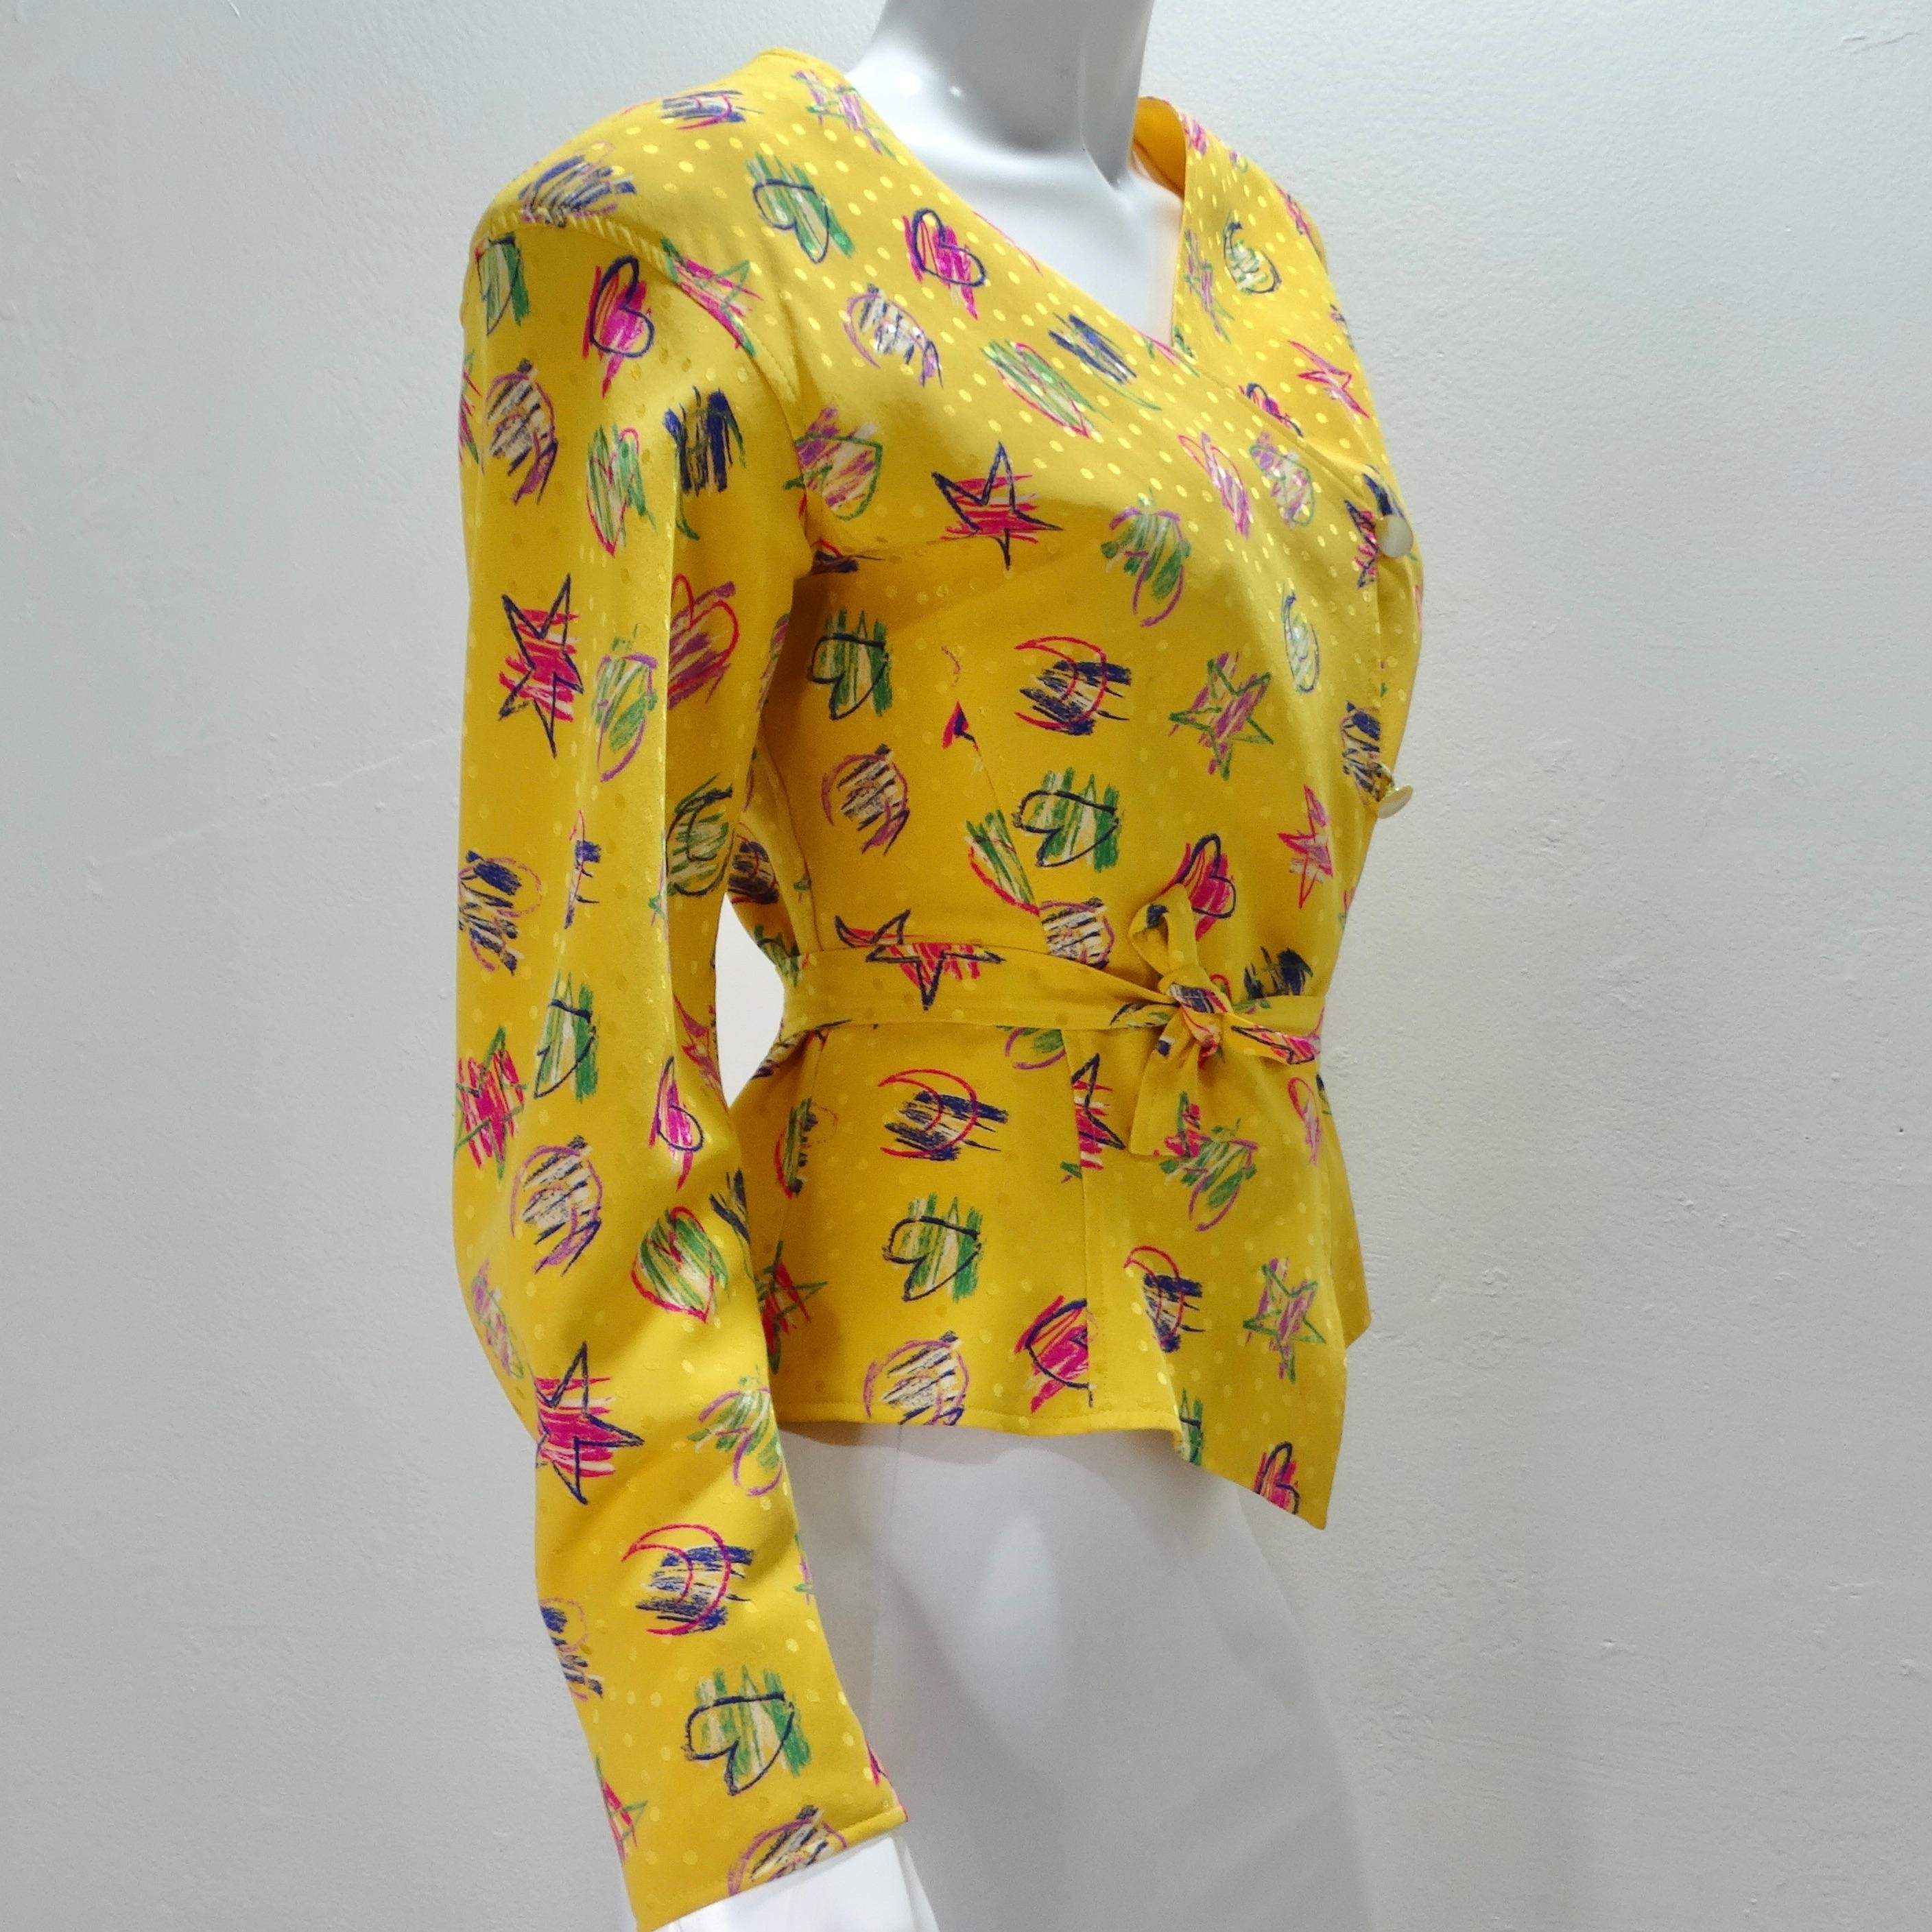 Emanuel Ungaro 1980s Heart Print Button Down Blouse In Good Condition For Sale In Scottsdale, AZ